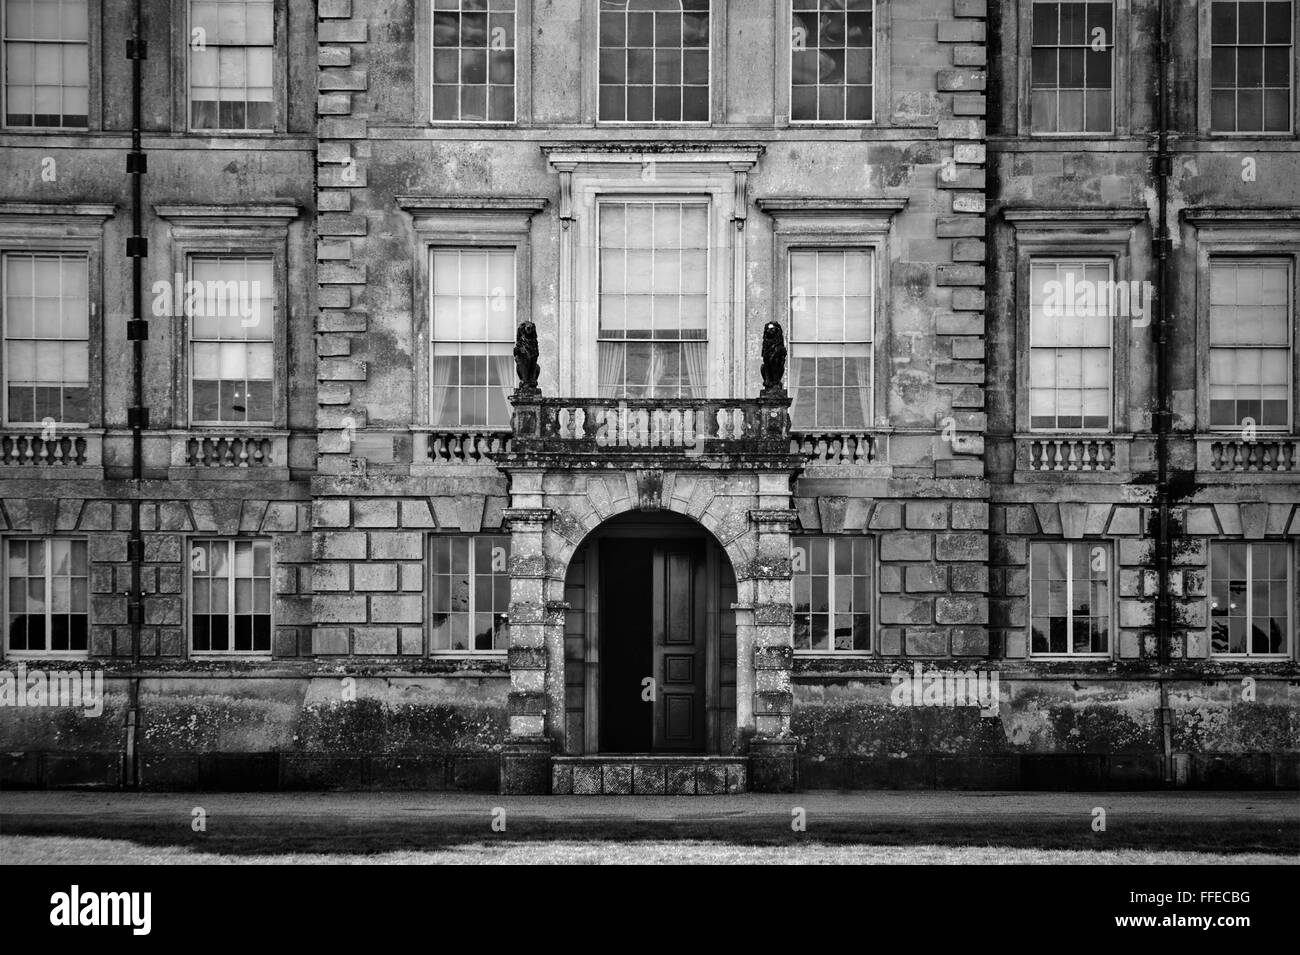 Unidentified old English mansion house with balcony overlooking entrance Stock Photo